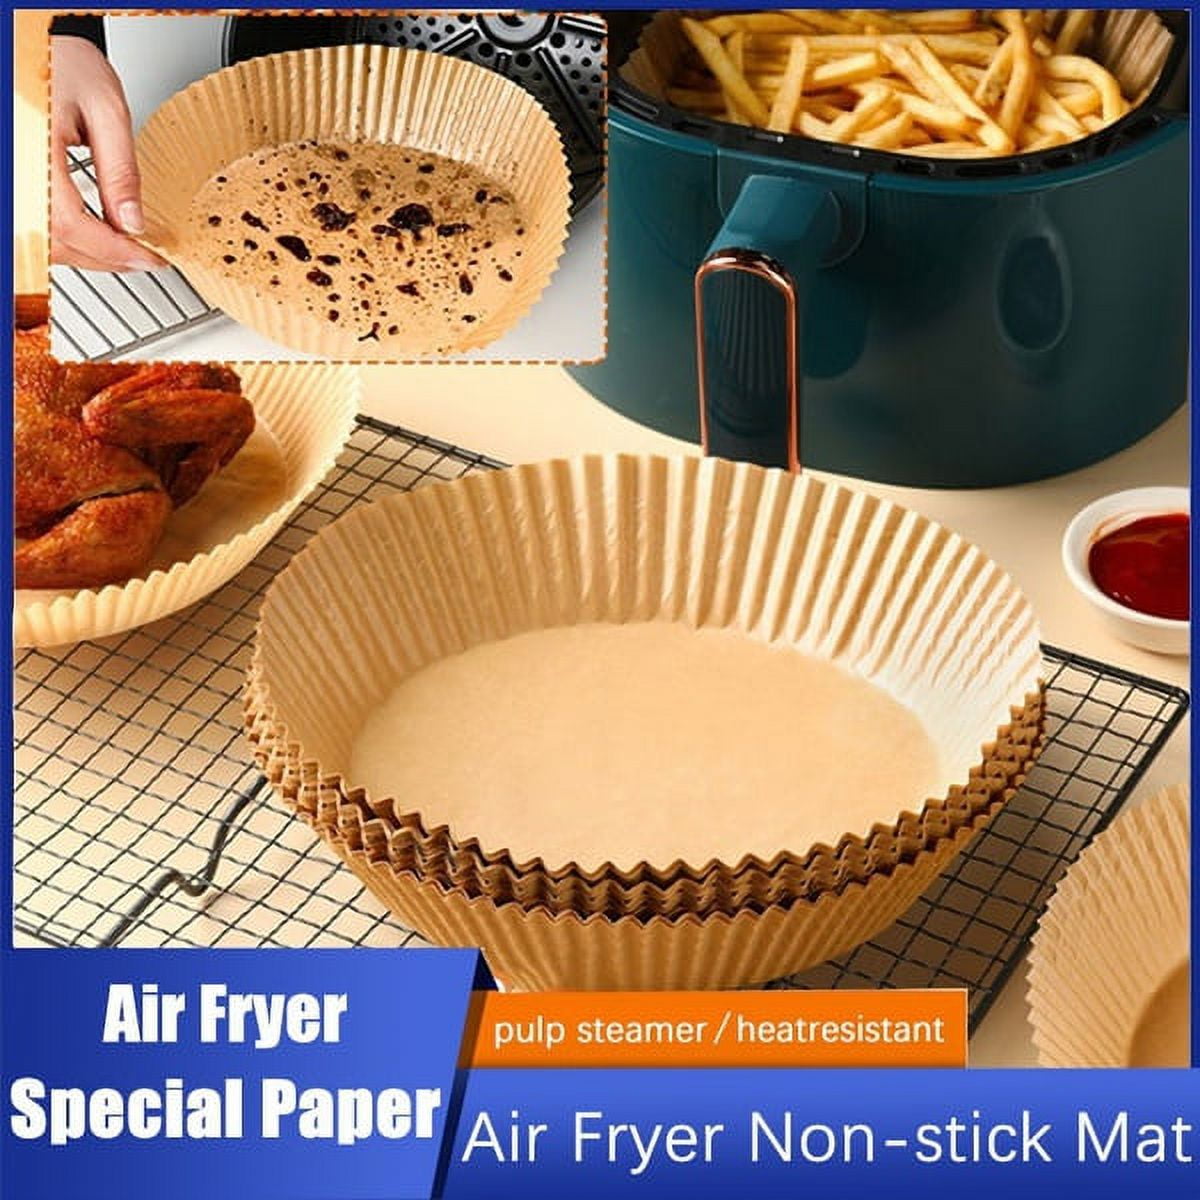 COSORI Air Fryer Liners 6.3 inch (Fits 3-5 QT) – 50 Pcs Non-Stick Square  Air Fryer Disposable Paper Liners for Easy Cleanup – Compatible with Cosori